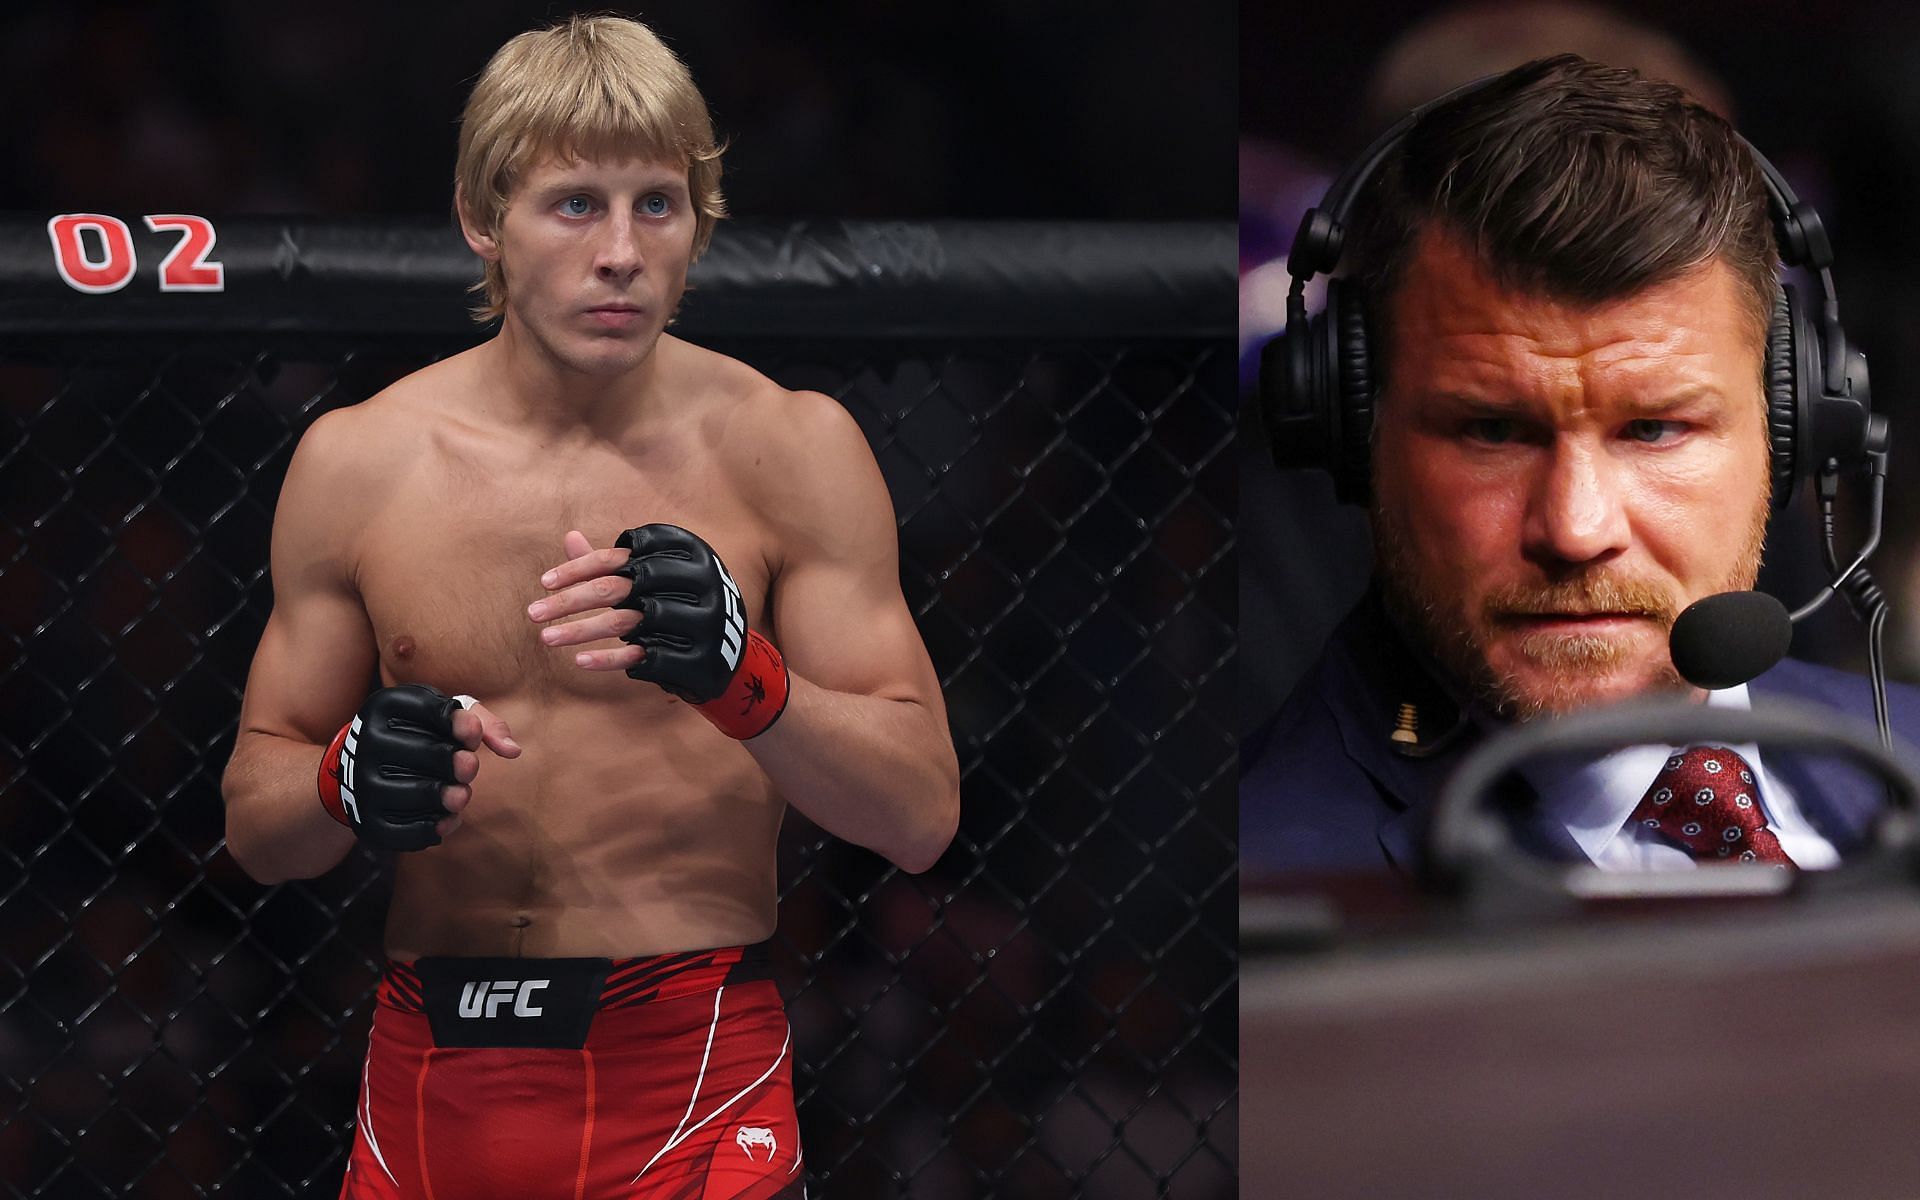 Paddy Pimblett (left) and Michael Bisping (right). [Images courtesy: Getty Images]